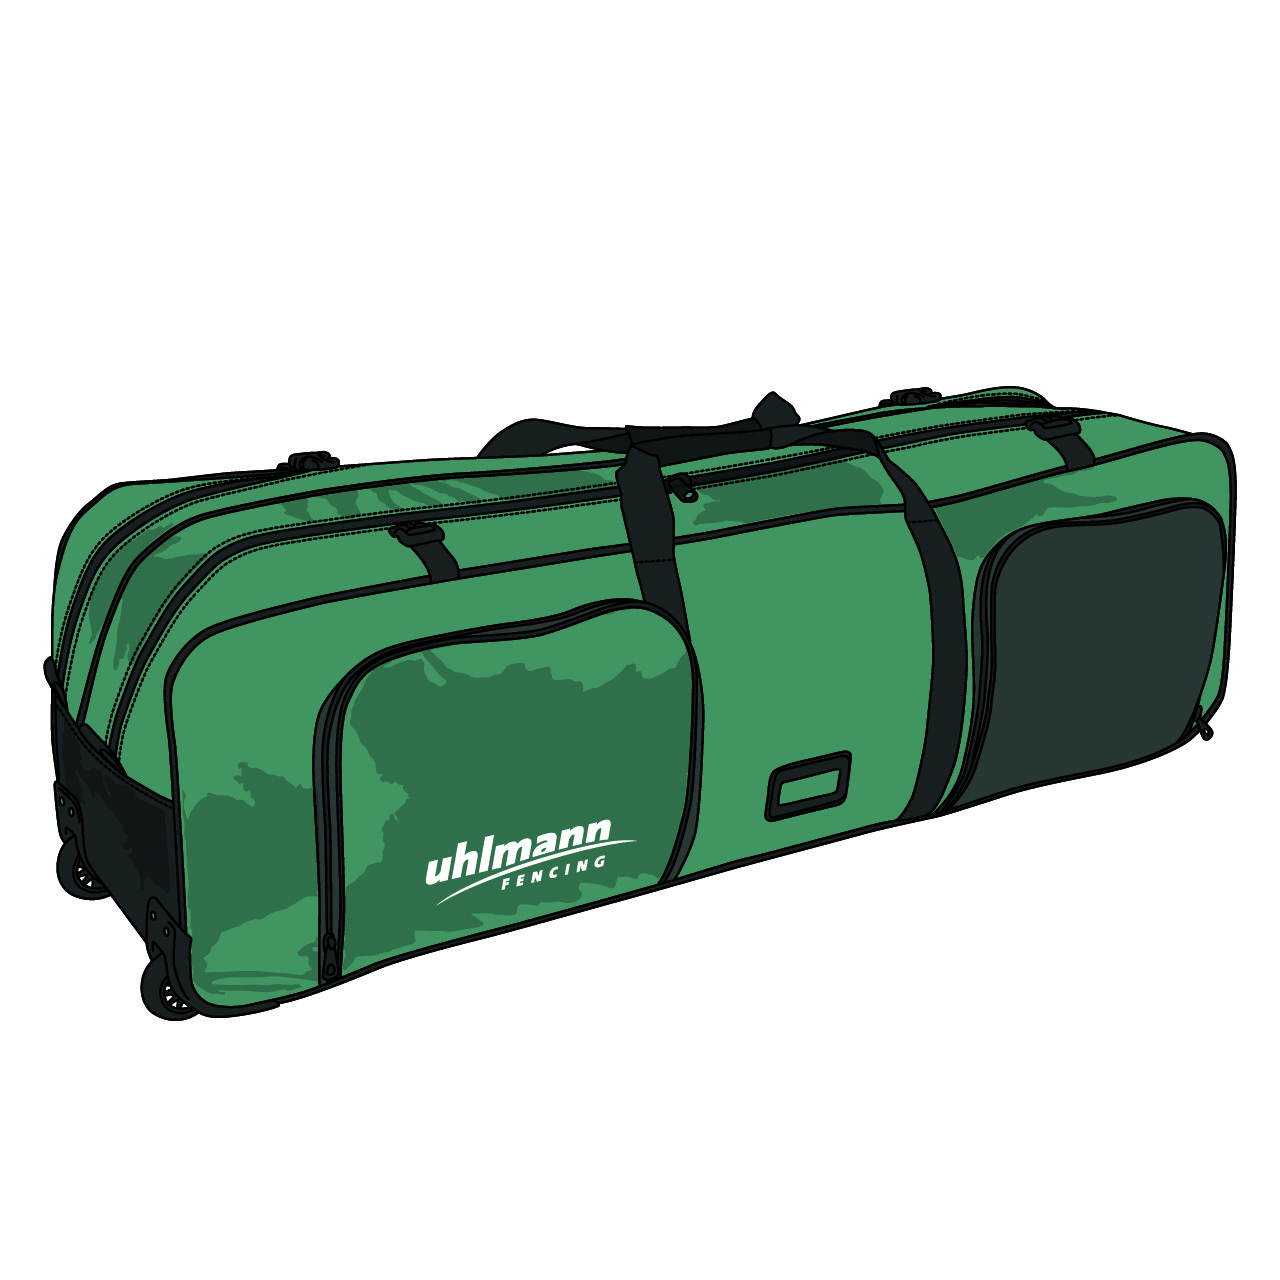 rollbag "Exclusive", 2 main partitions, 2 outside pockets